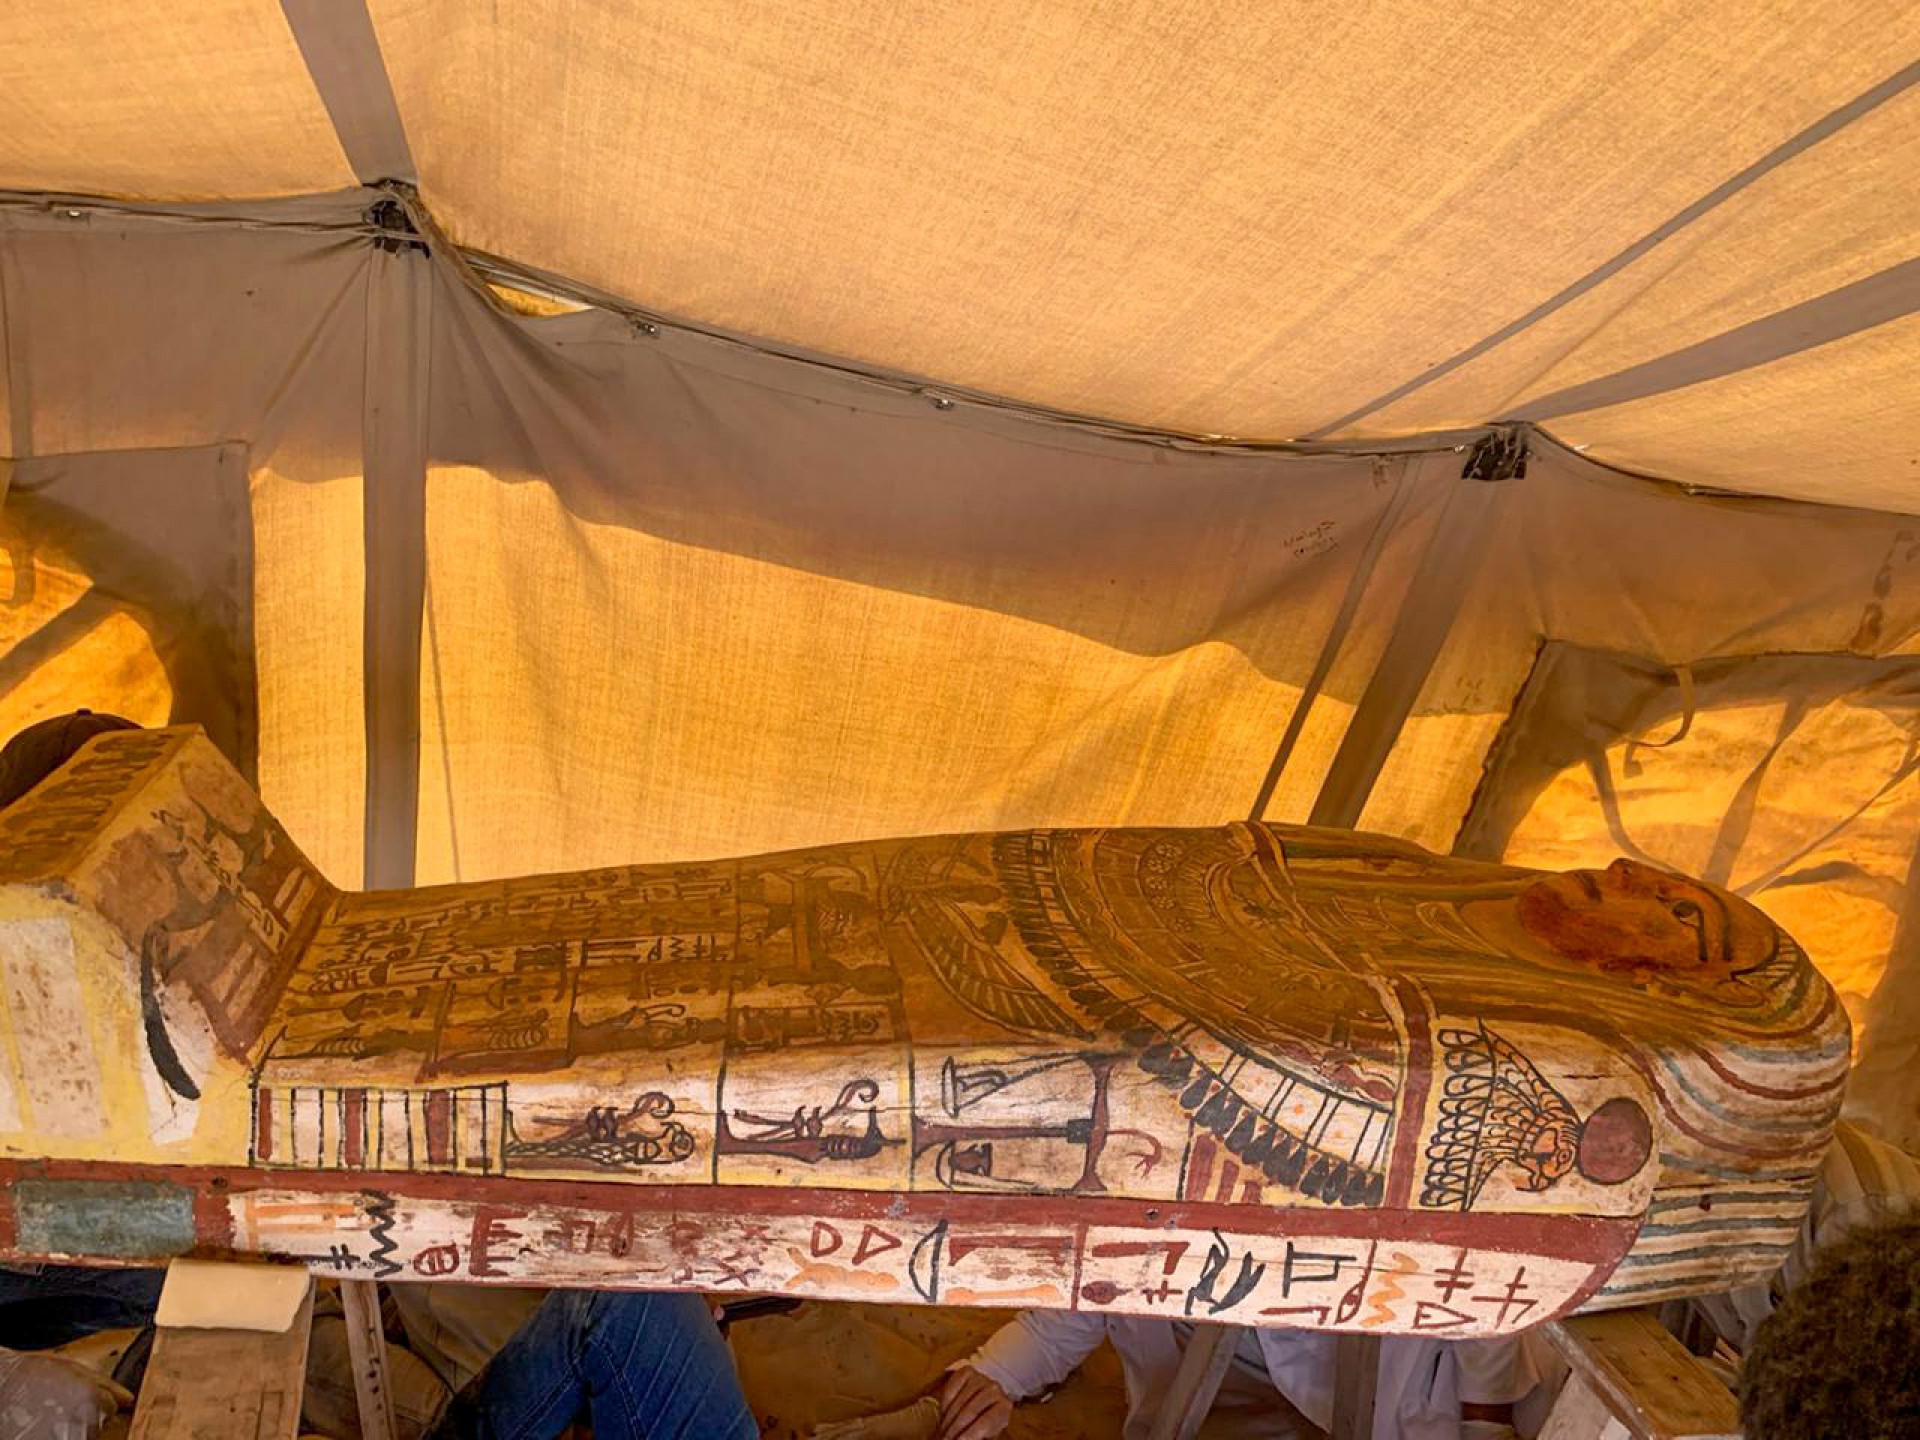 A handout picture released by the Egyptian Ministry of Antiquities on September 20, 2020, shows one of fourteen 2500 year-old coffins discovered in a burial shaft at the desert necropolis of Saqqara south of the capital. - Egypt's antiquities ministry announced the discovery of 14 new coffins in the Saqqara area buried deep in a well for around 2500 years. (Photo by - / Egyptian Ministry of Antiquities / AFP) / === RESTRICTED TO EDITORIAL USE - MANDATORY CREDIT 